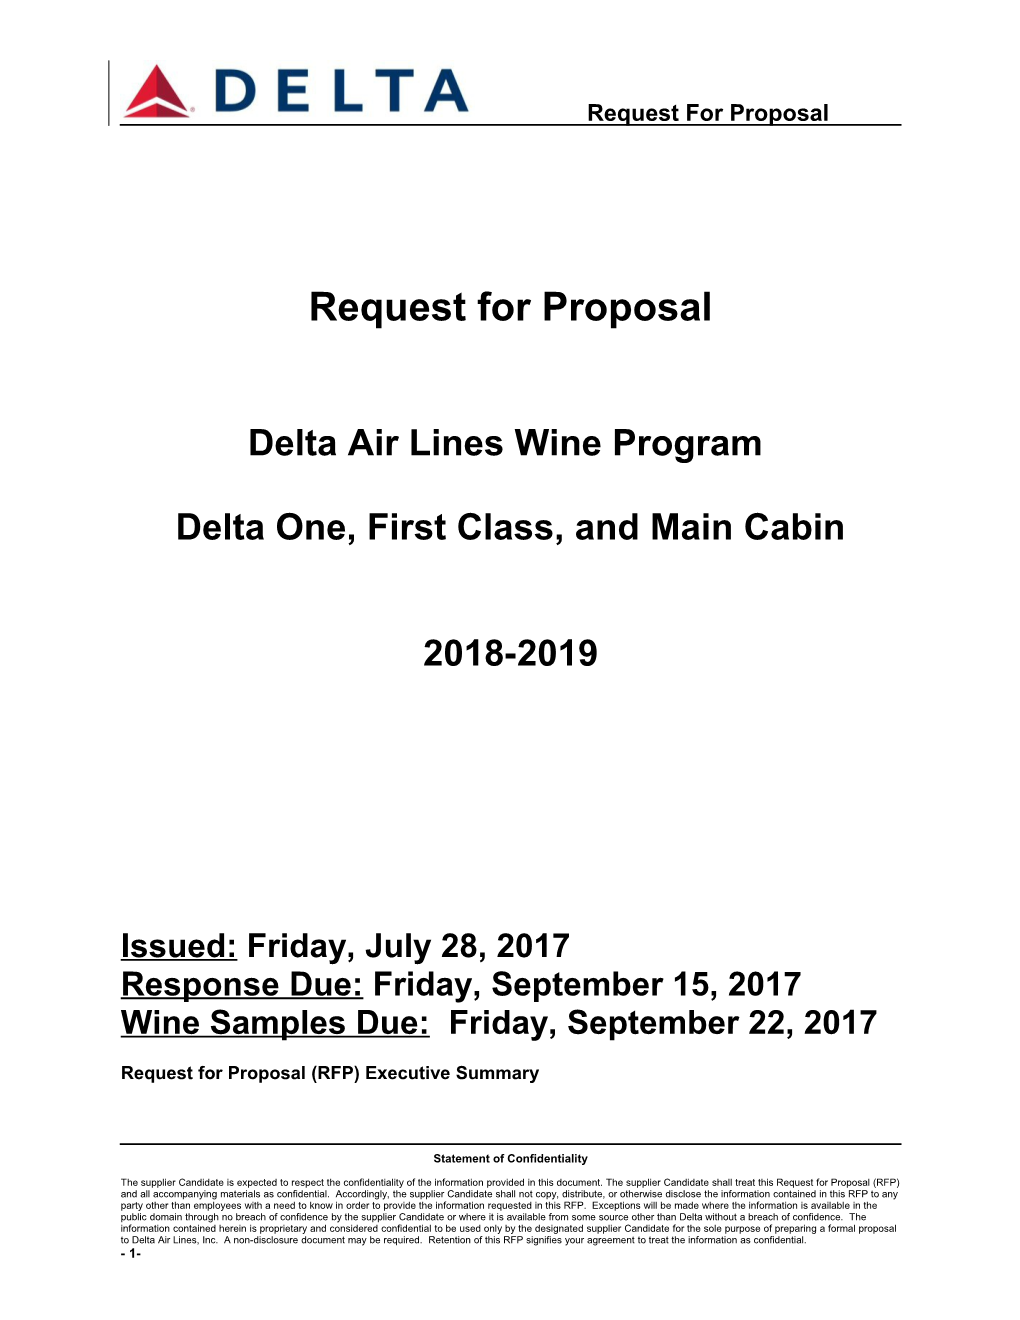 Request for Proposal s42